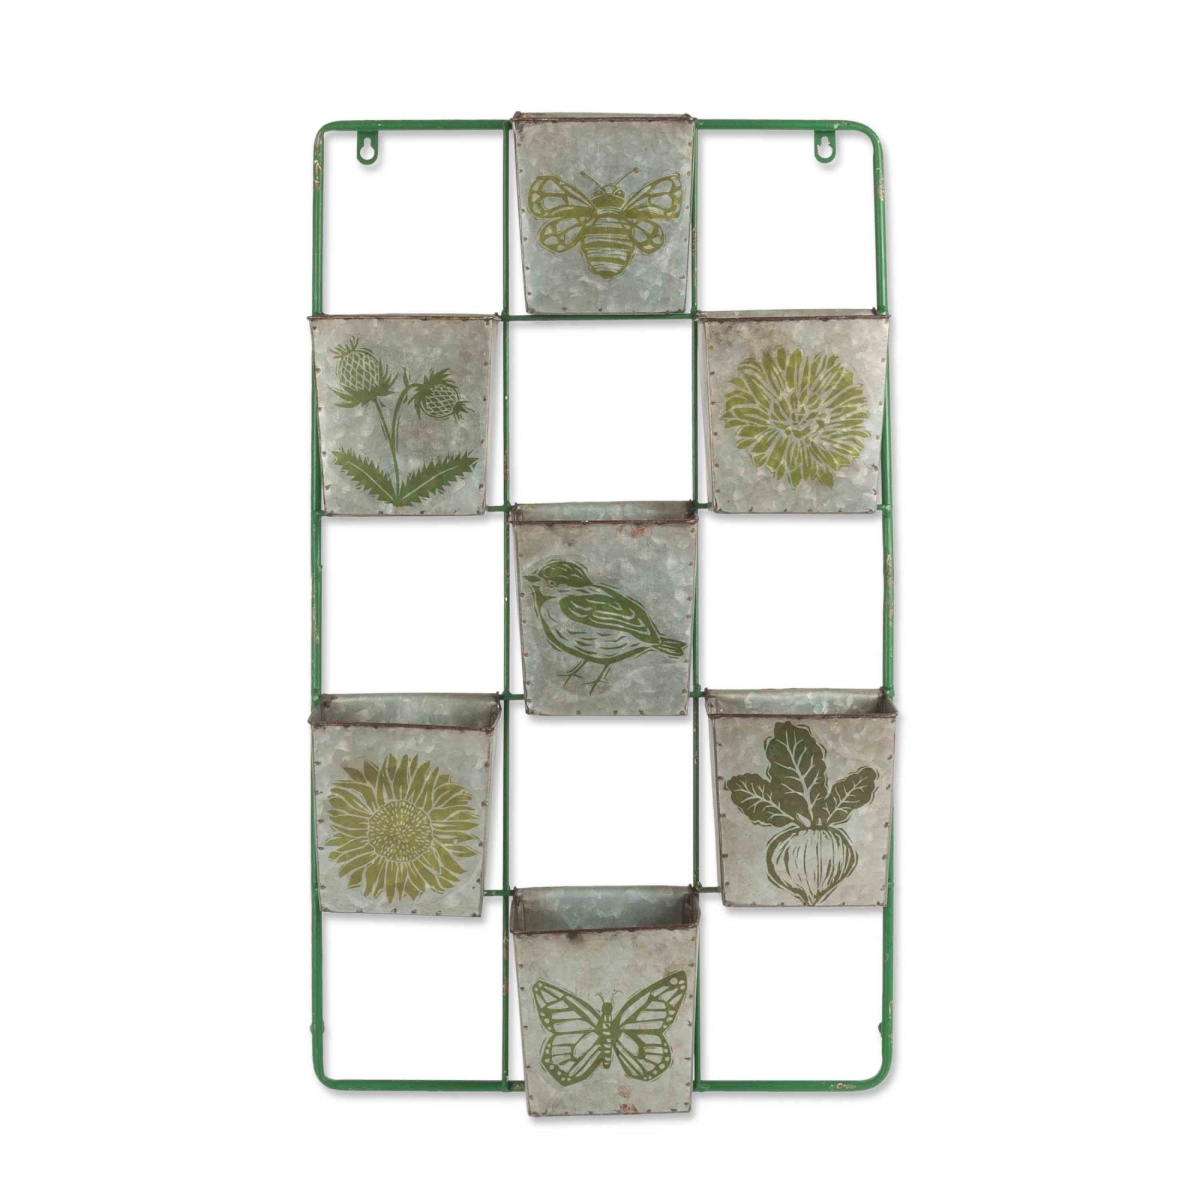 Gerson 94480ec Metal Wall Organizer With 7 Pockets Decorated In Green Two Toned Linocut Desisgns - Multi Color